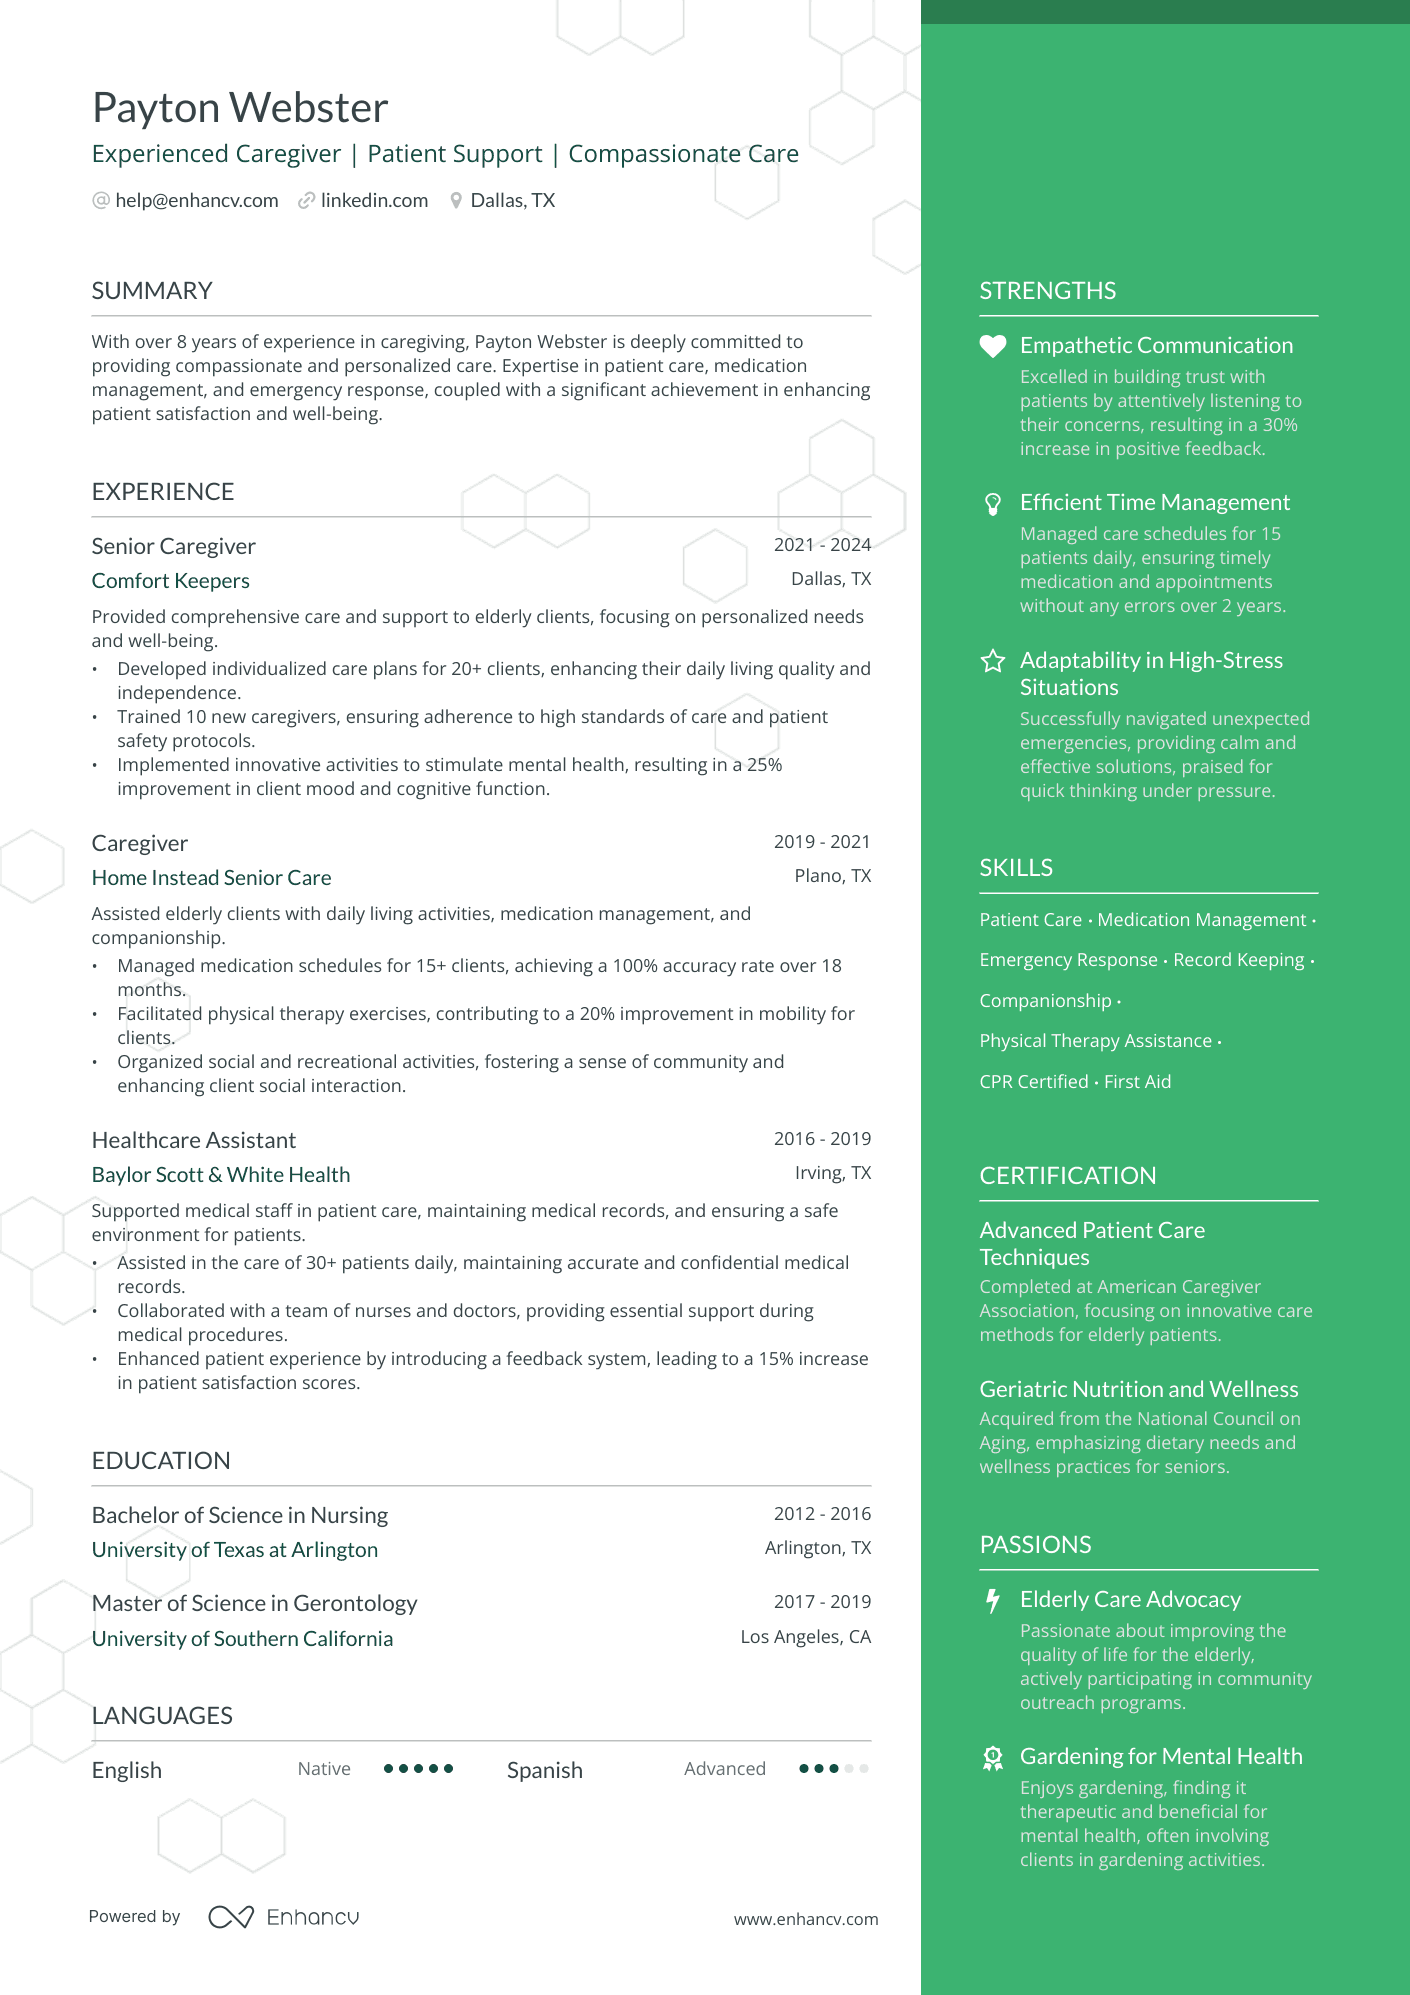 Experienced Caregiver | Patient Support | Compassionate Care resume example